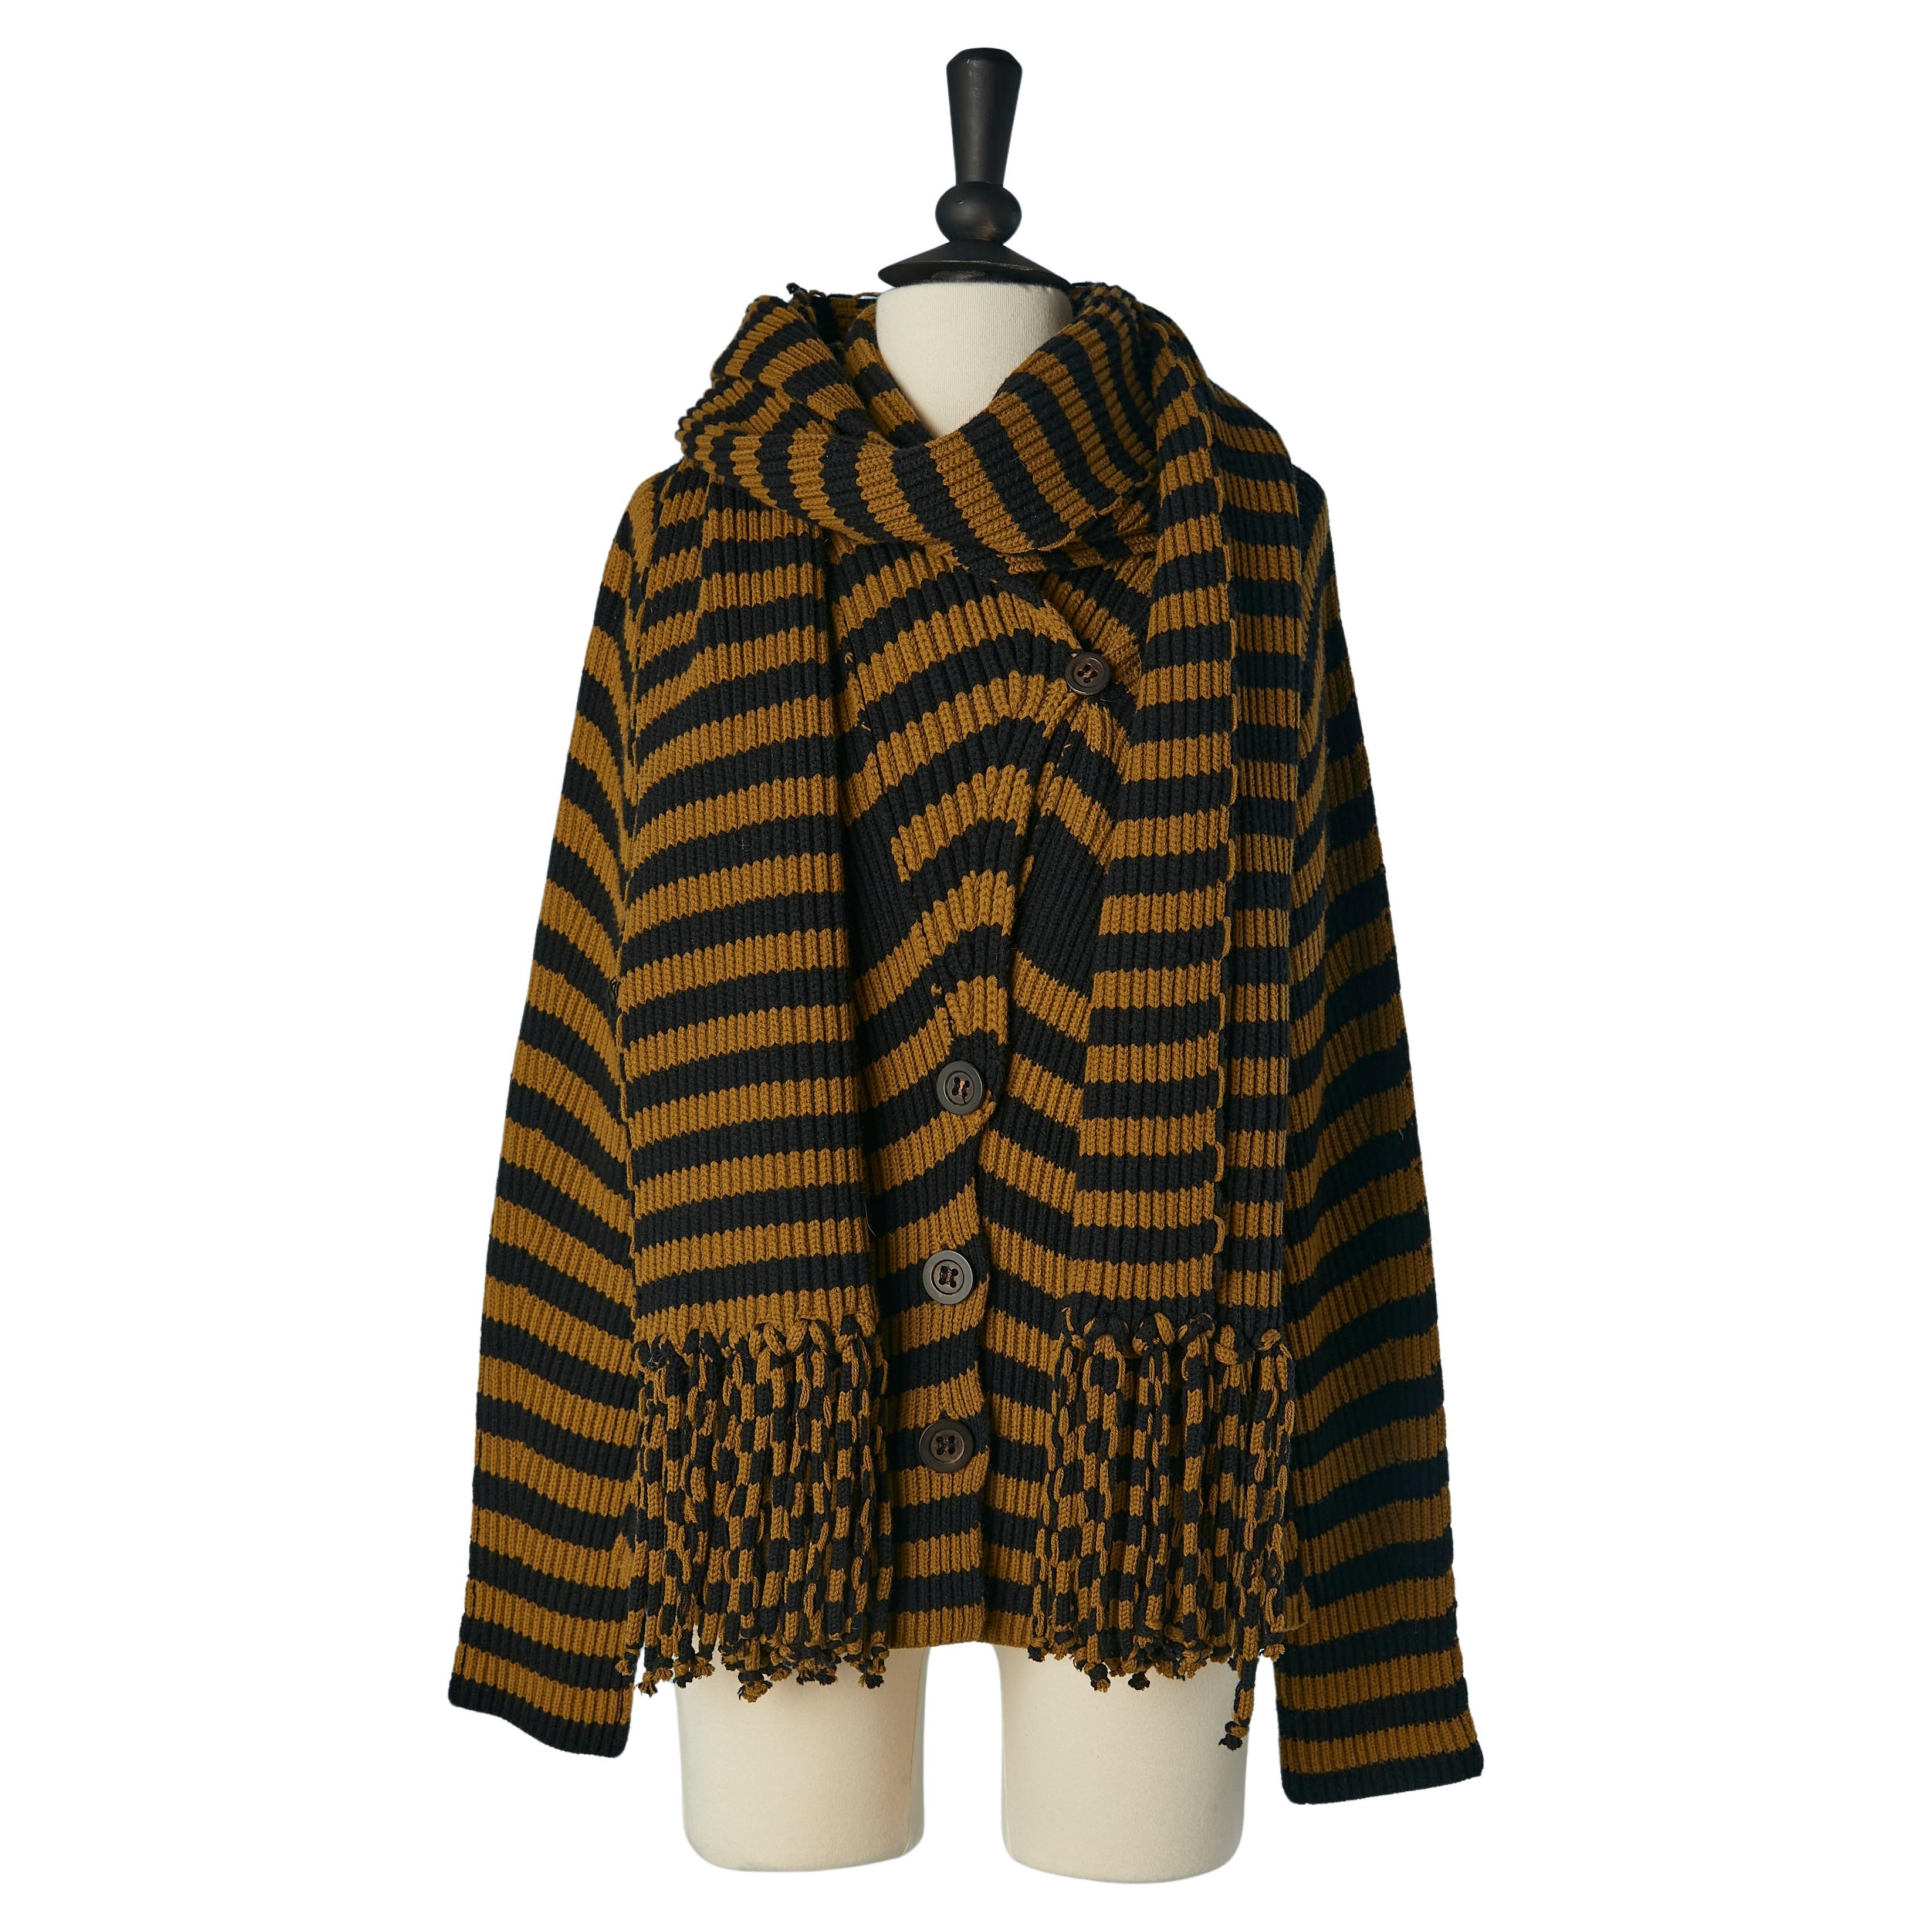 Kaki and black striped wool and cashmere cardigan with scarf Sonia Rykiel  For Sale